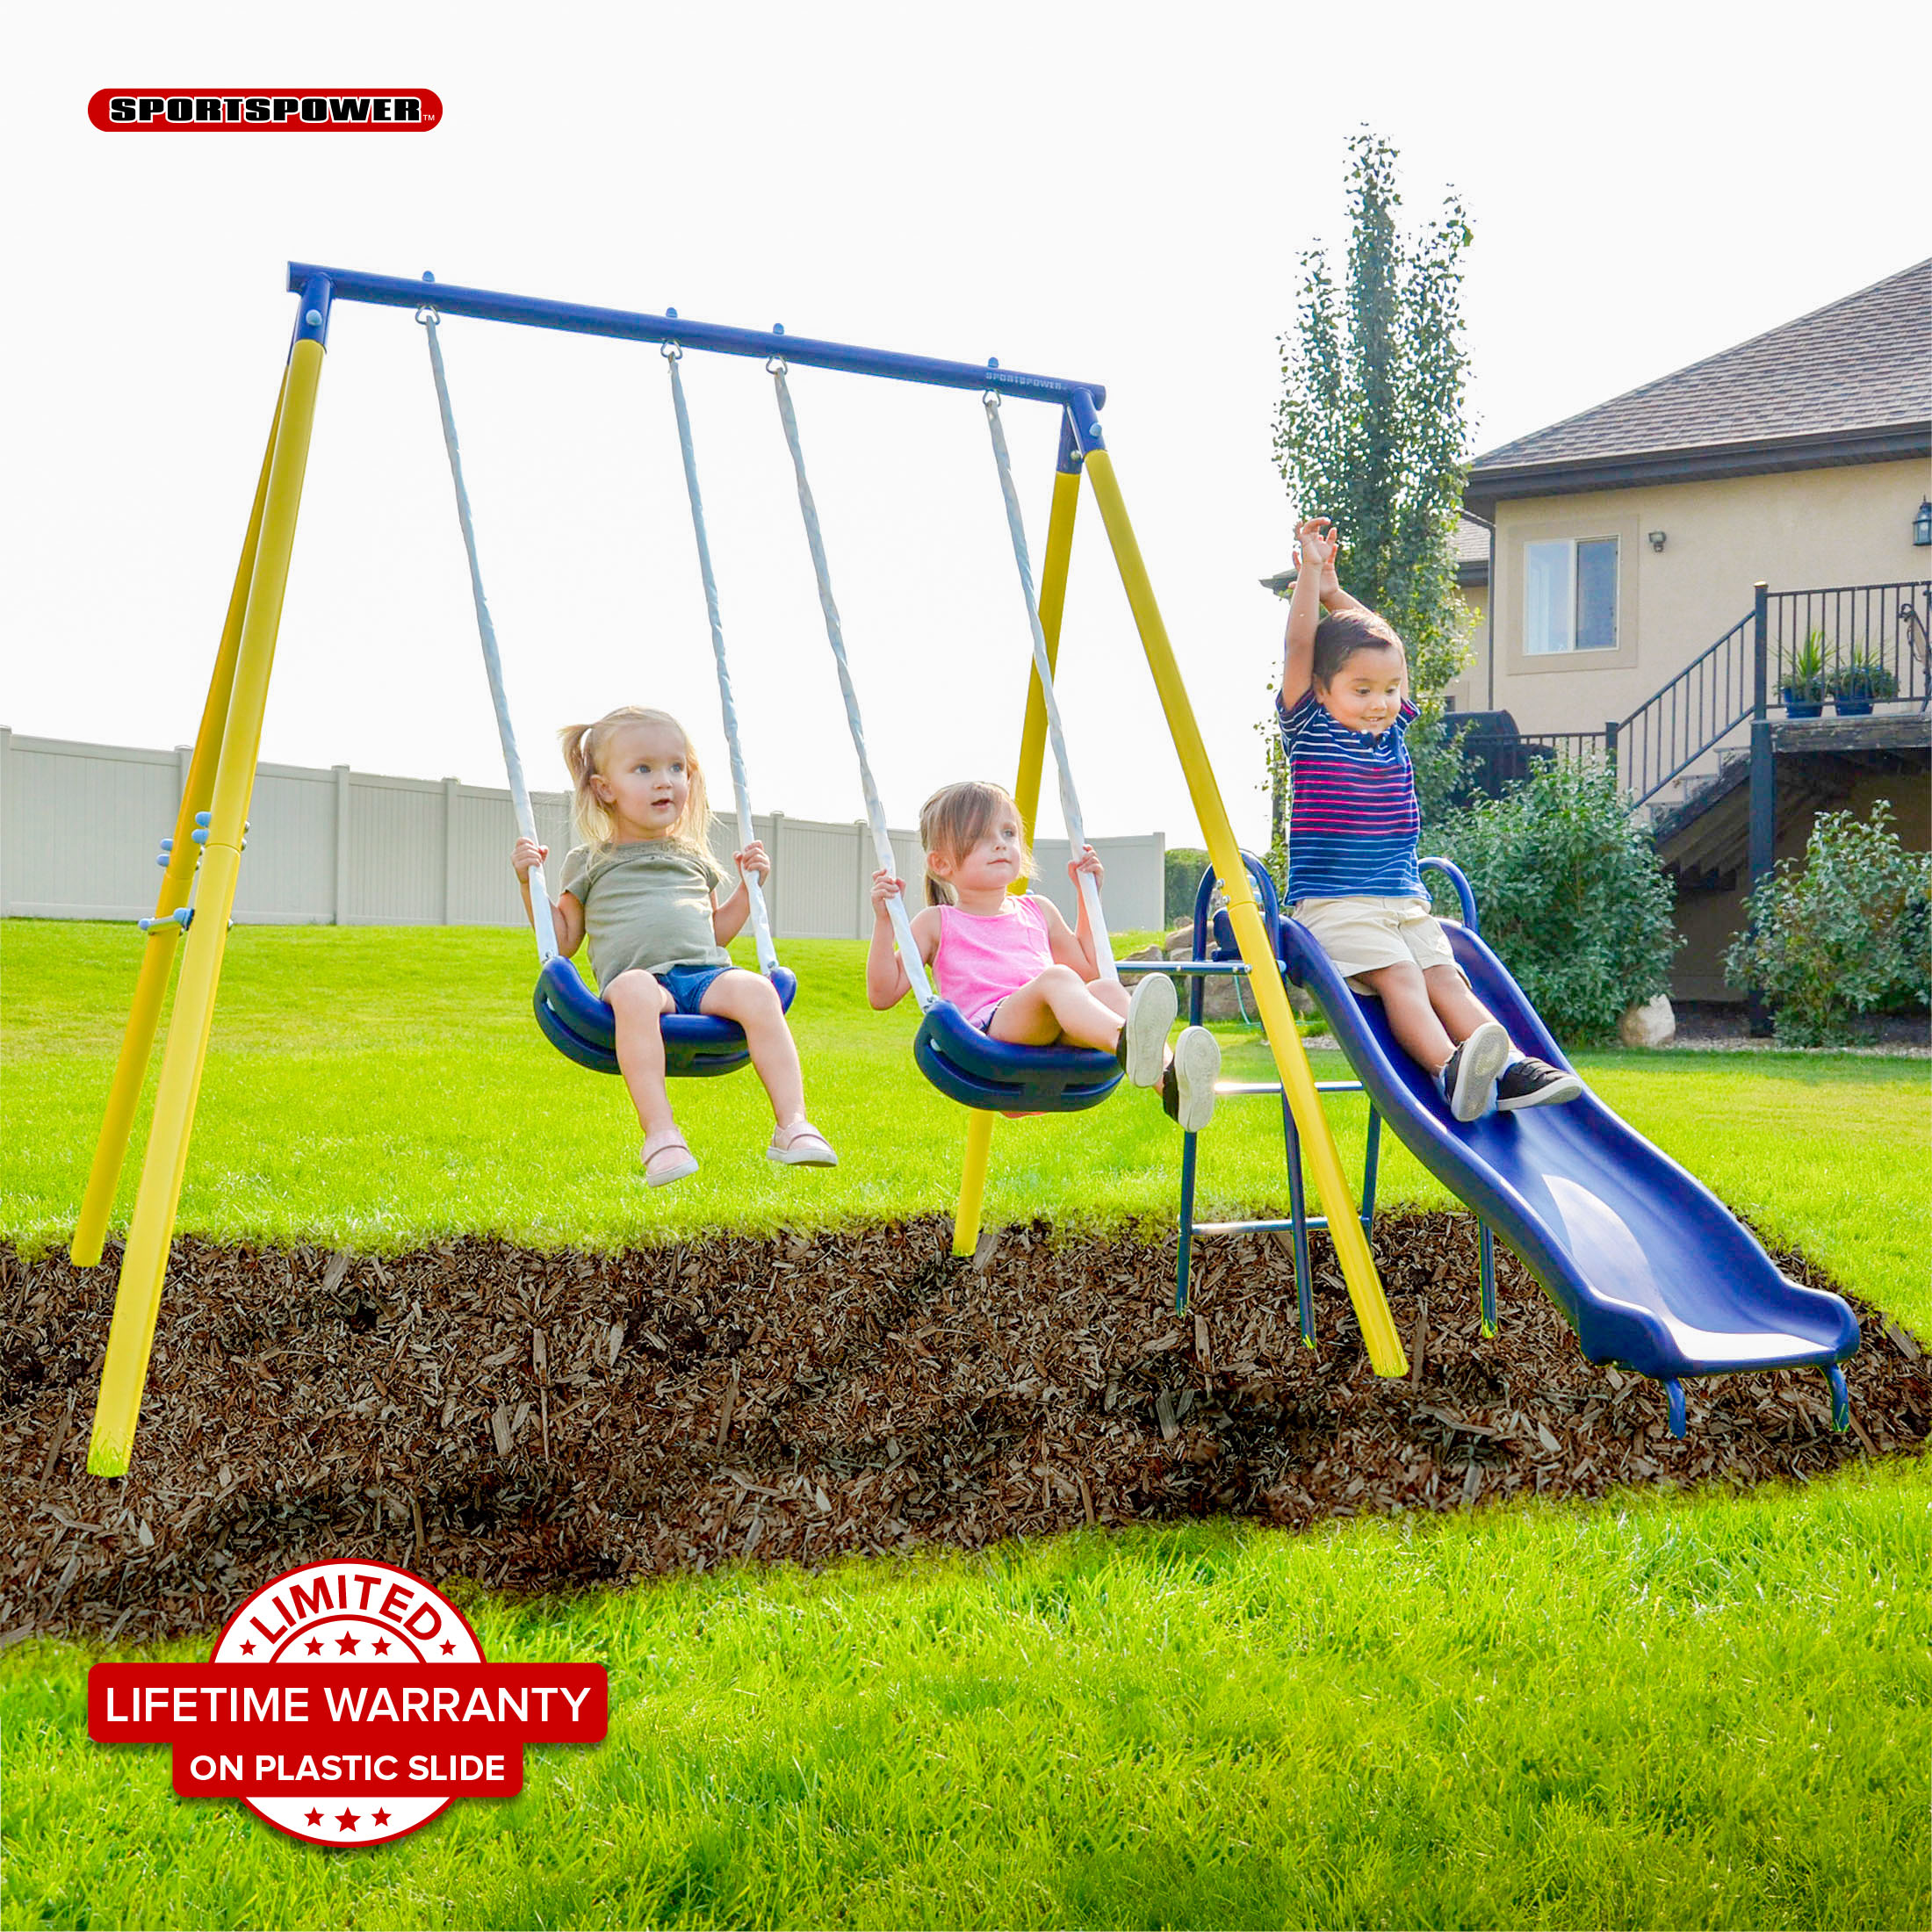 Sportspower Power Play Time Metal Swing Set with 2 Swings and Lifetime Warranty on Blow Molded Slide - image 1 of 10